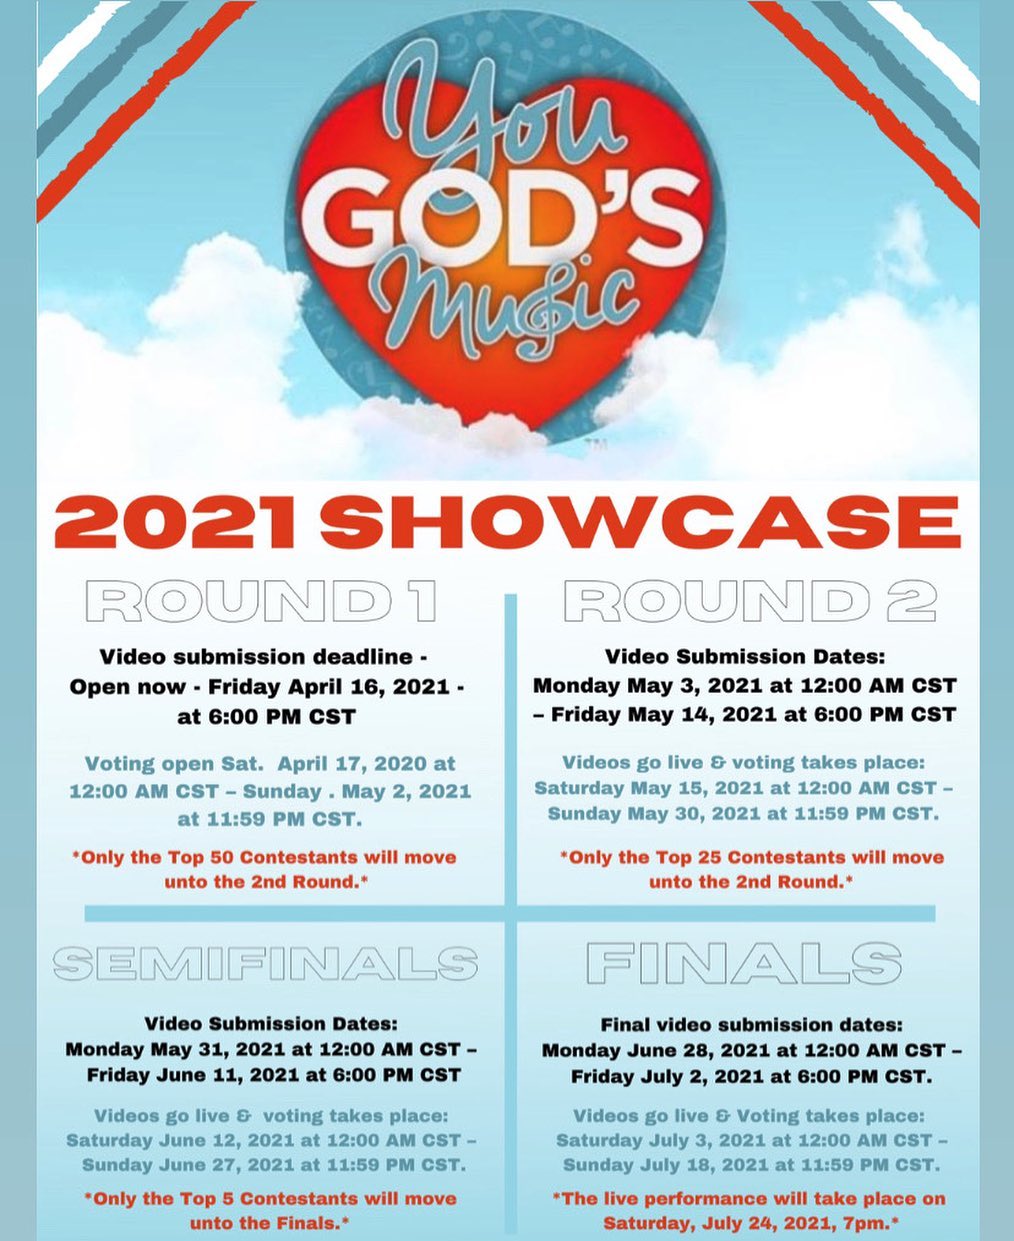 Here are all the submission dates and times for our next Showcase!